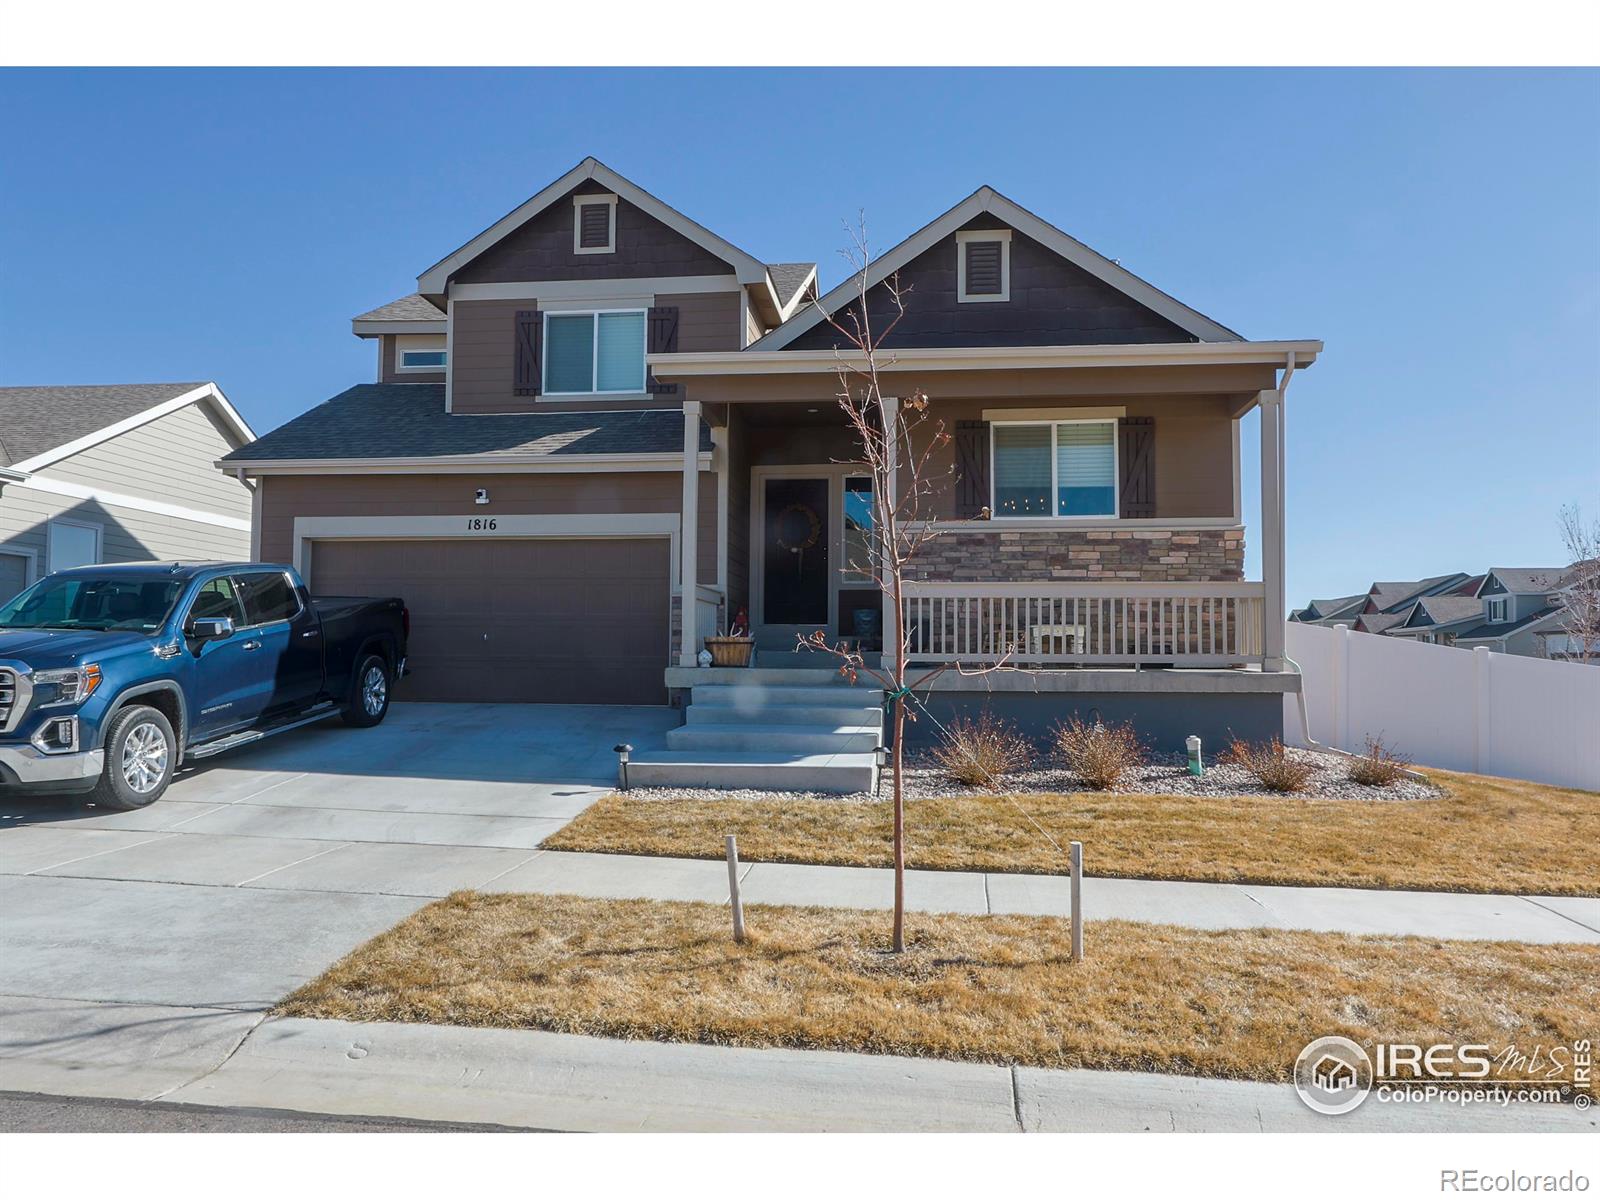 1816  103rd Ave Ct, greeley MLS: 4567891004405 Beds: 4 Baths: 3 Price: $509,500